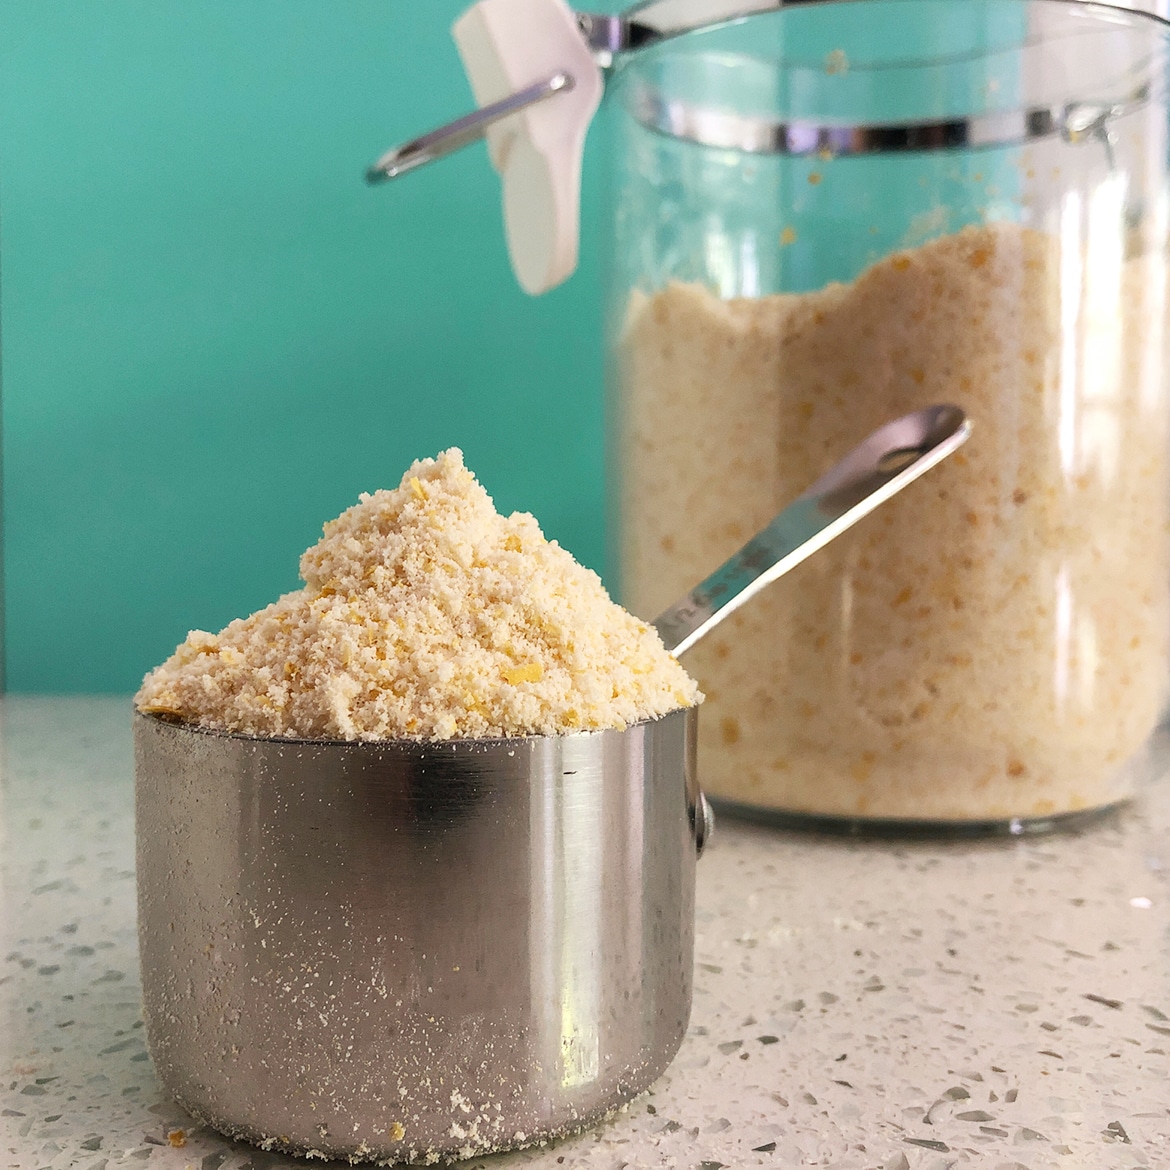 Measuring cup heaped full with the Mother Mix, made from almond flour, nutritional yeast, tapioca starch, and salt